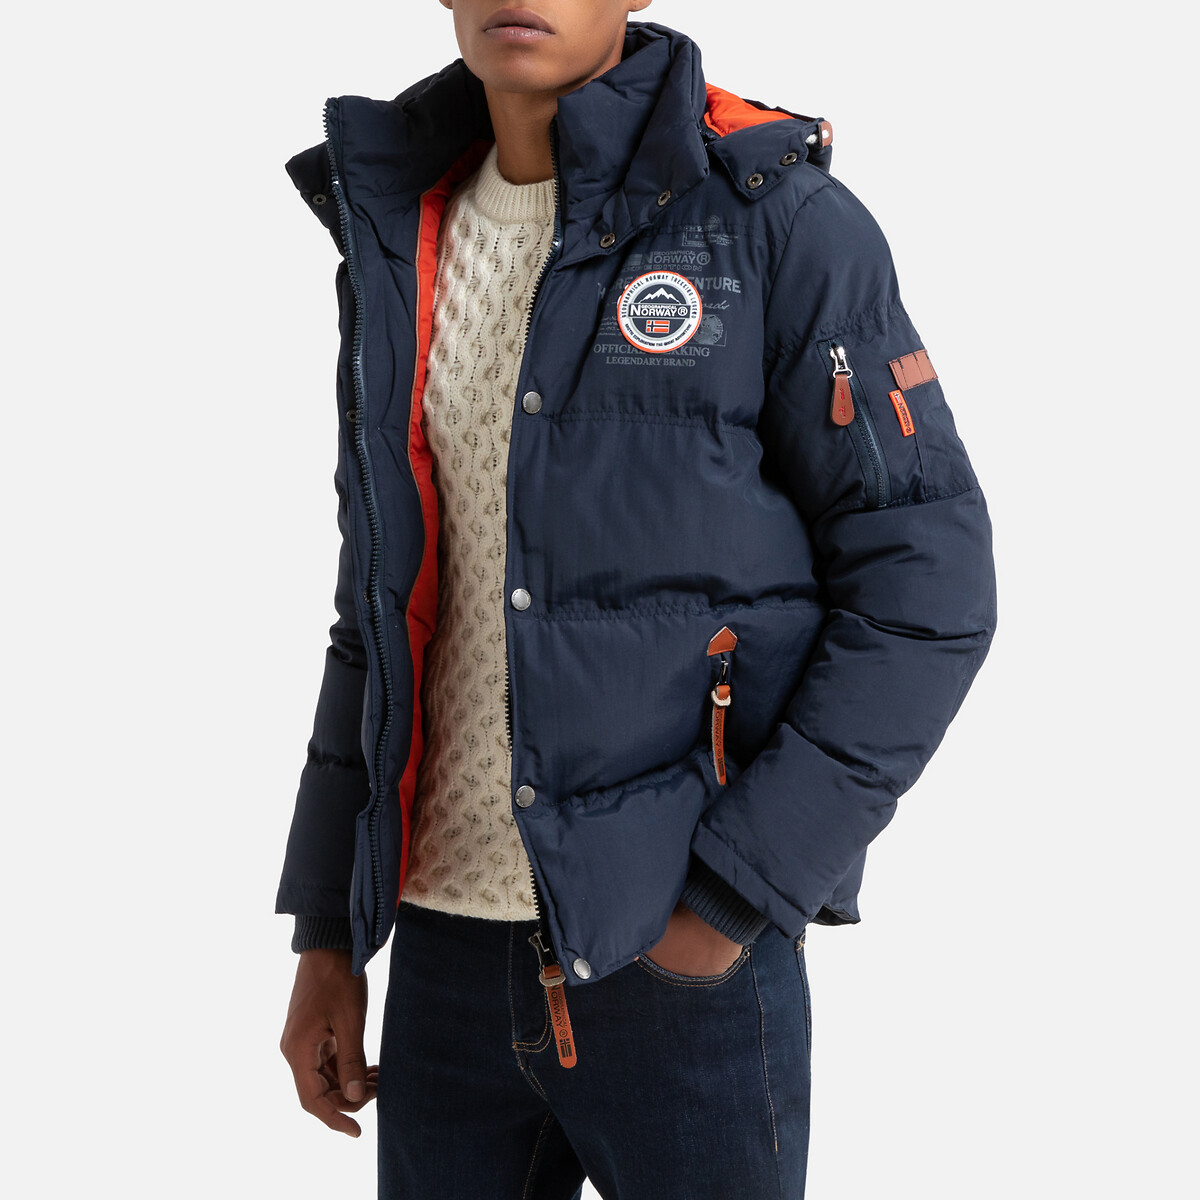 Parka GEOGRAPHICAL NORWAY 52 L noir Homme Vêtements Geographical Norway Homme Manteaux & Vestes Geographical Norway Homme Doudounes & Parkas Geographical Norway Homme Parkas Geographical Norway Homme Parkas Geographical Norway Homme 